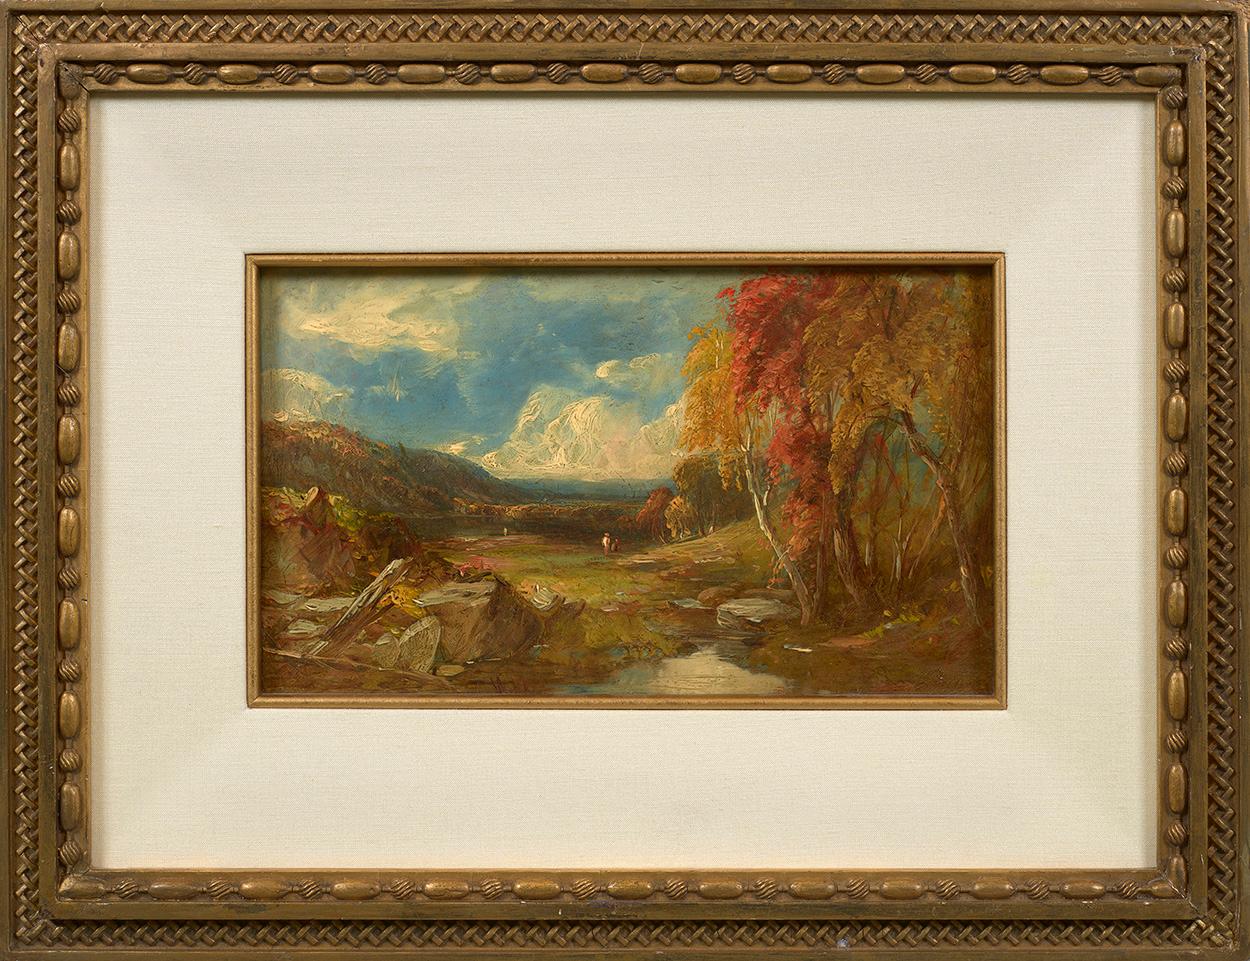 Reminiscence of Vermont, ca. 1860–1870 - Painting by William Hart